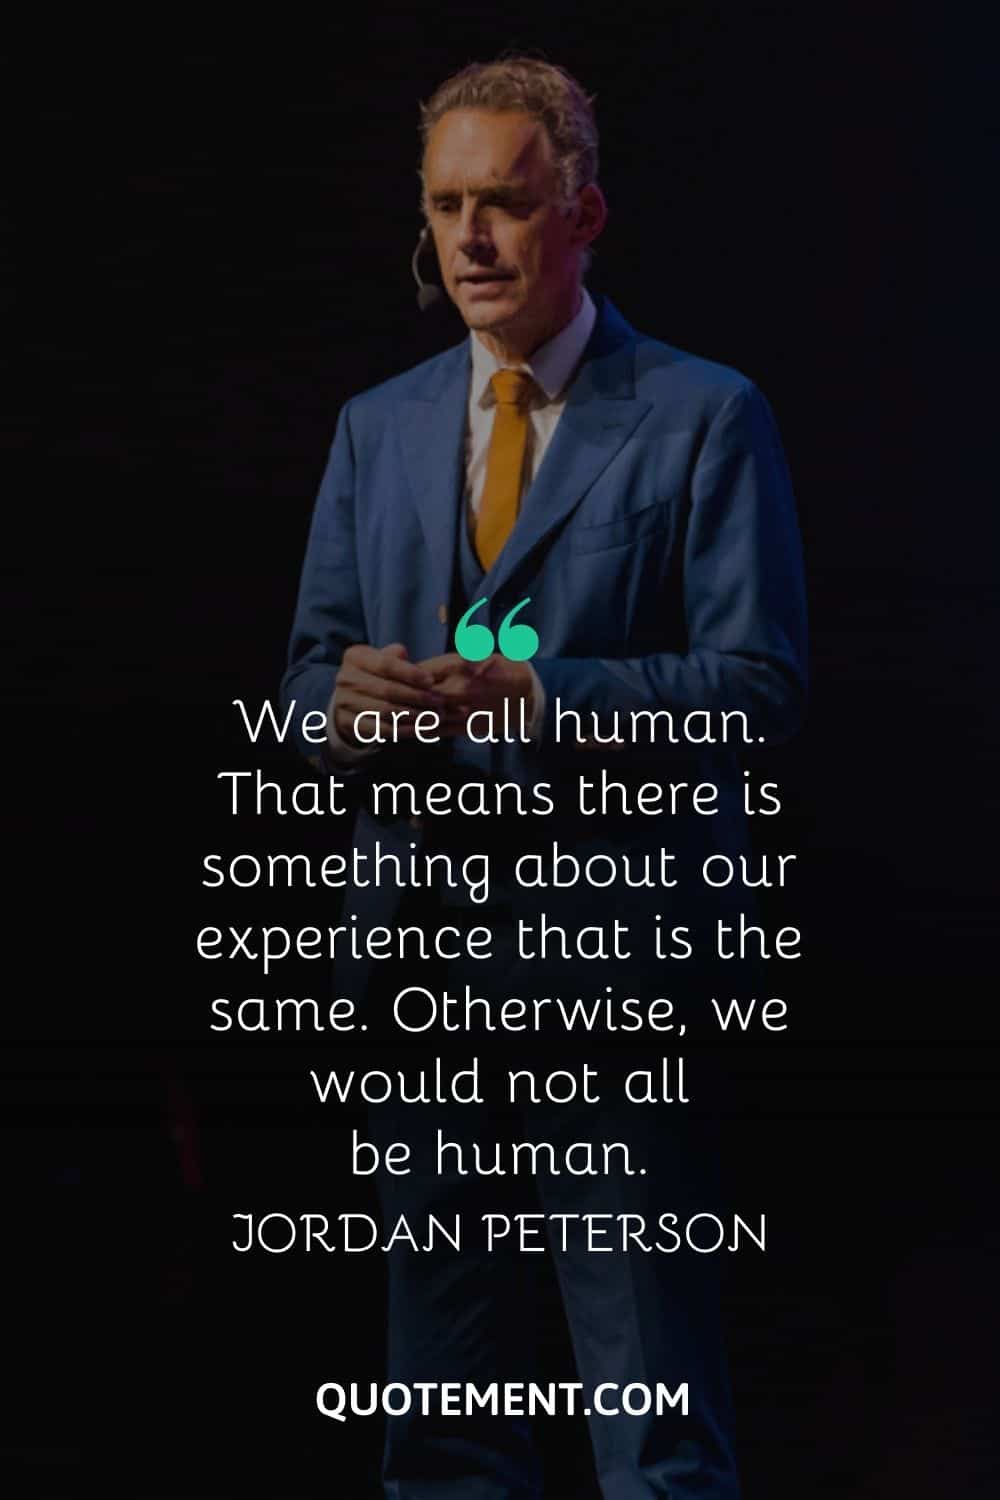 “We are all human. That means there is something about our experience that is the same. Otherwise, we would not all be human.” — Jordan Peterson